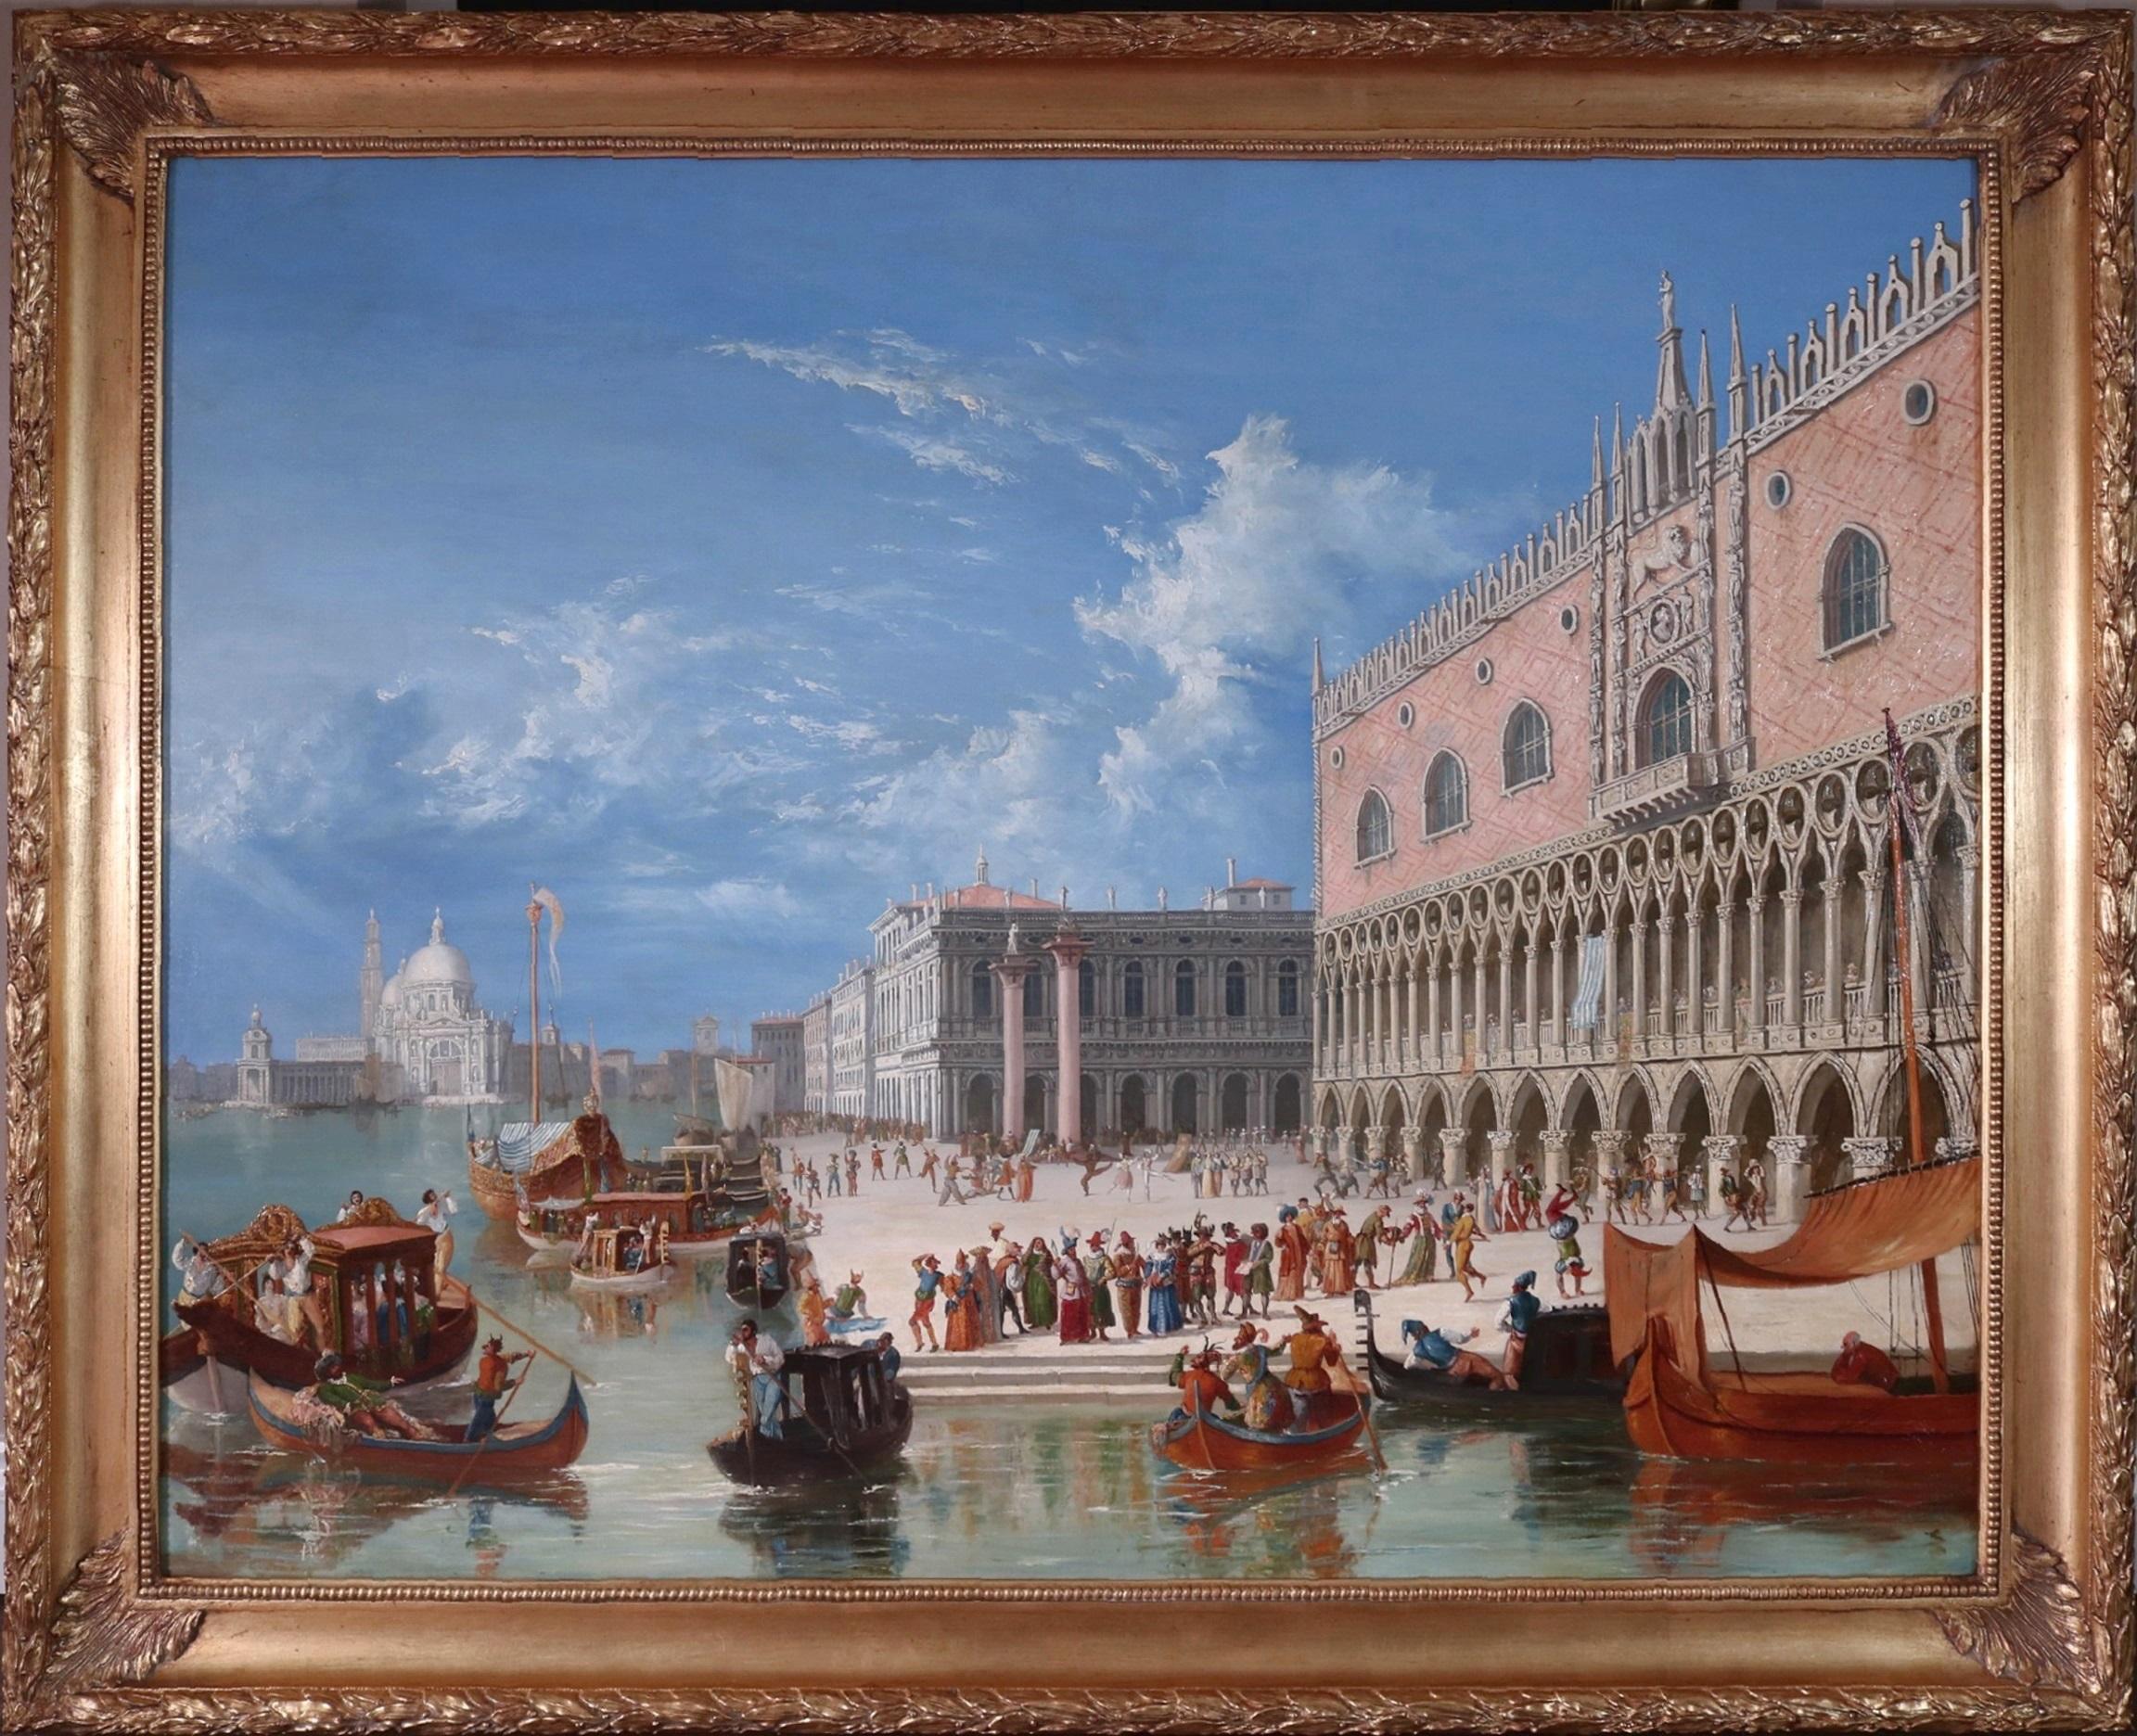 ‘Carnevale di Venezia’ by James Holland RWS (1799-1870).

The painting – which depicts an extensive view of the Grand Canal with hundreds of masked revellers before the Ducal Palace at the entrance to St. Mark’s Square – hangs in a fine quality gold